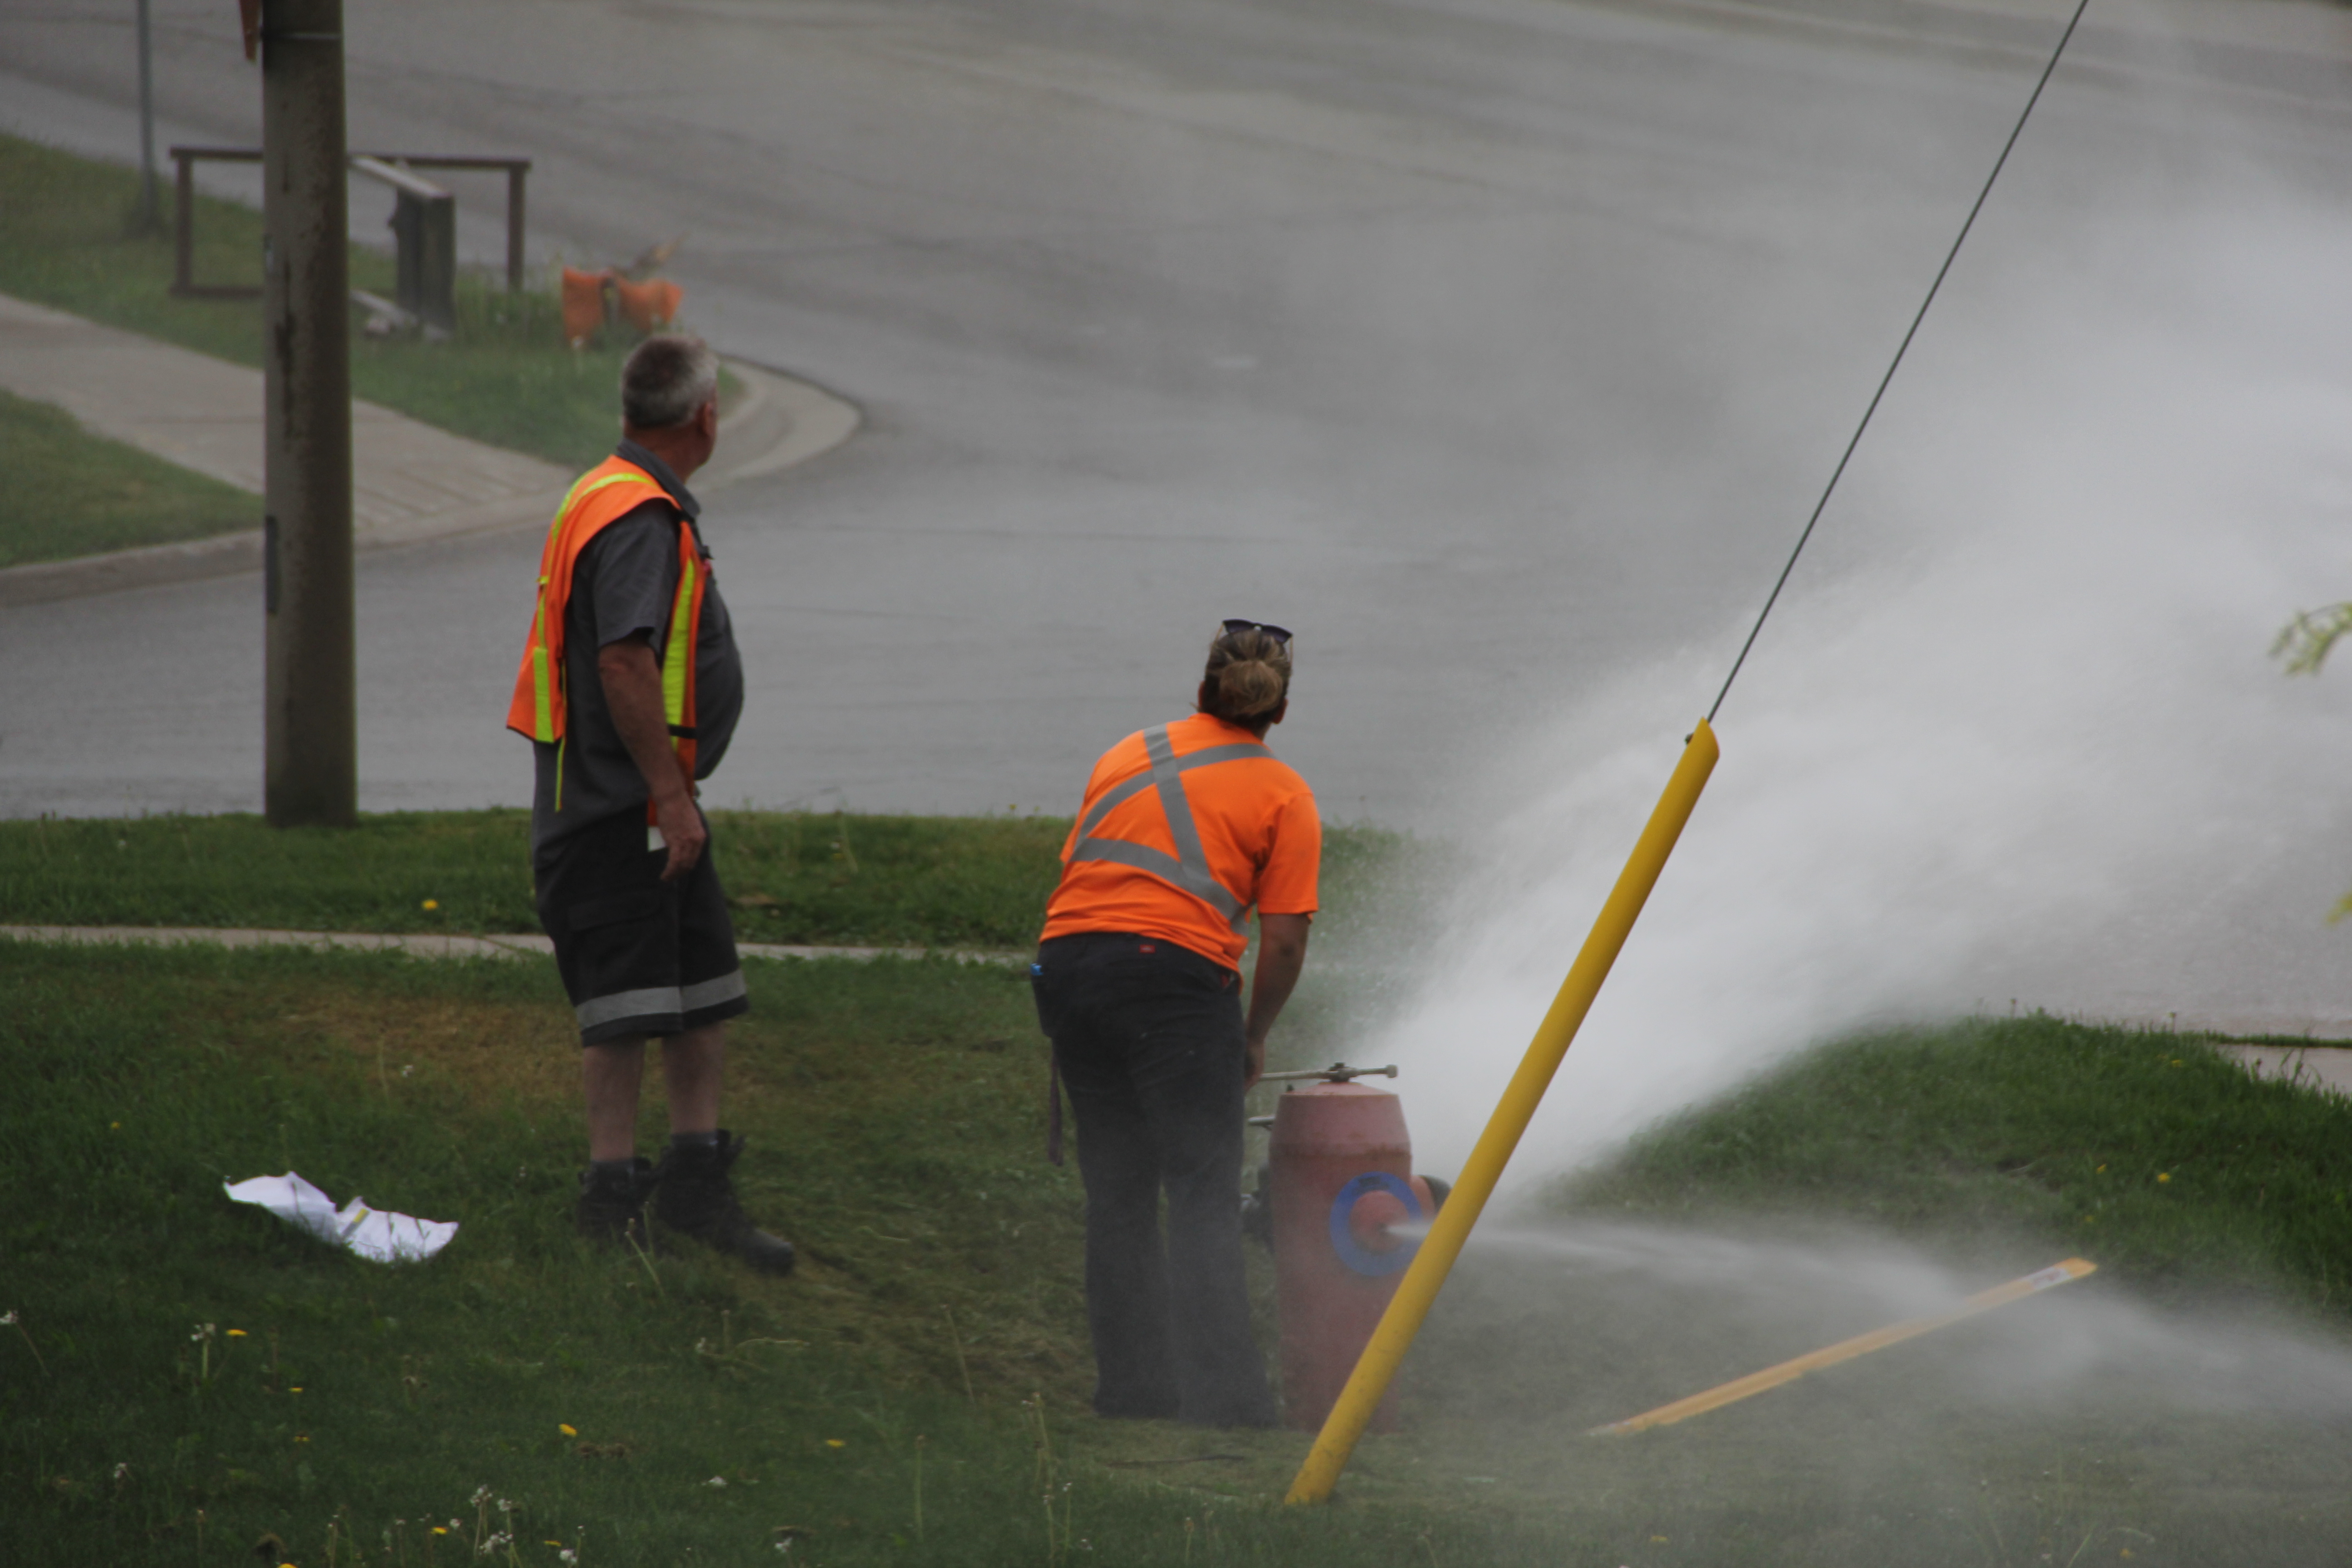 Two Waterworks Operators flushing a red fire hydrant on a street corner.